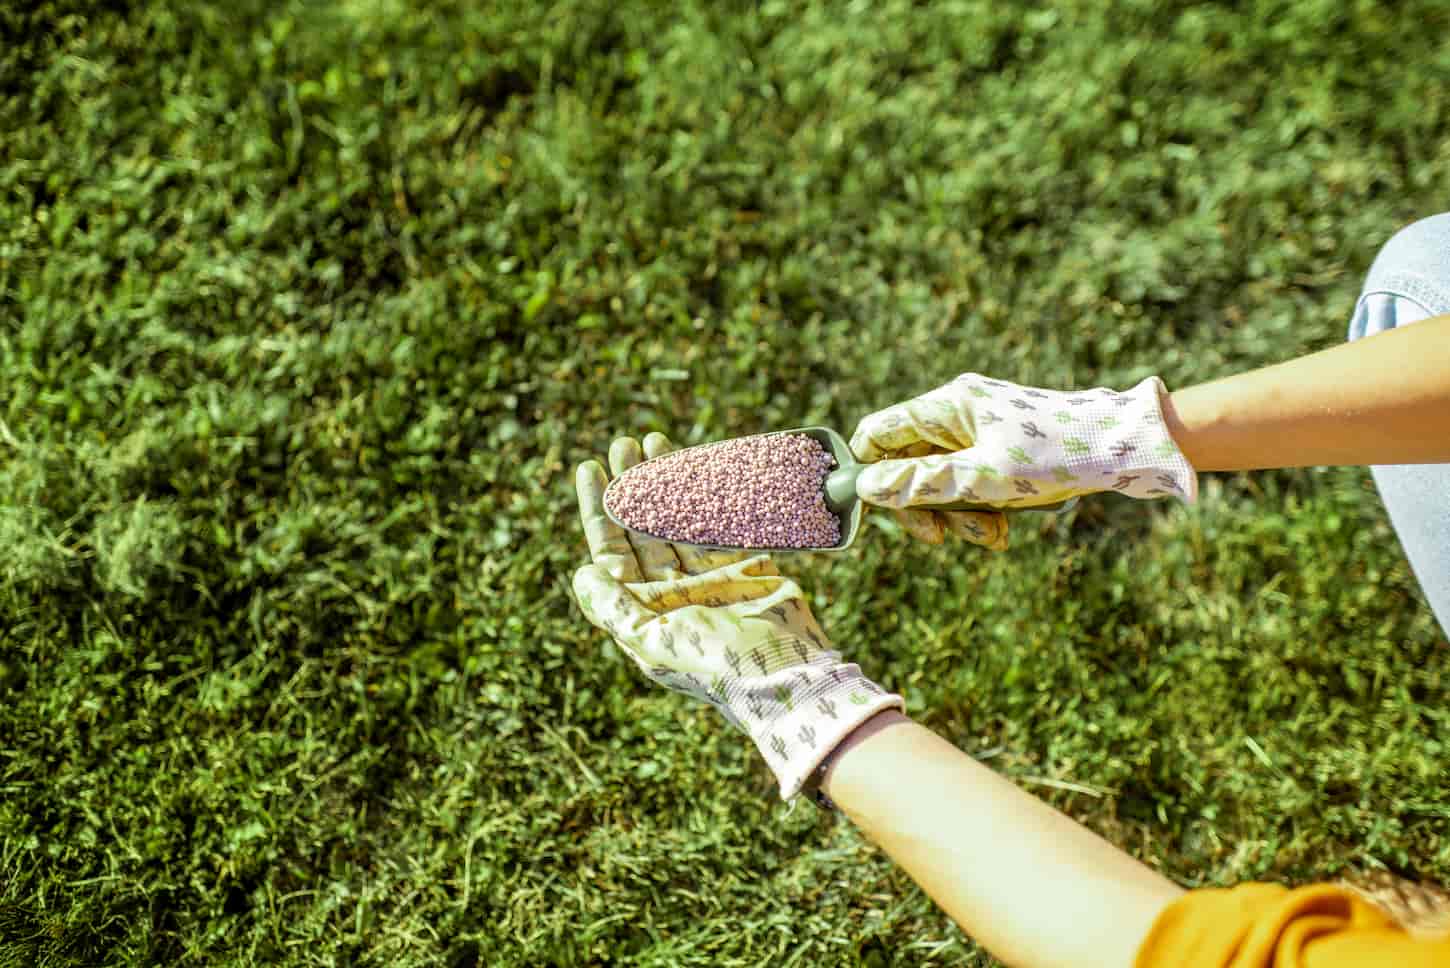 An image of female hands holding fertilizer for grass growth in granules on the grass background.